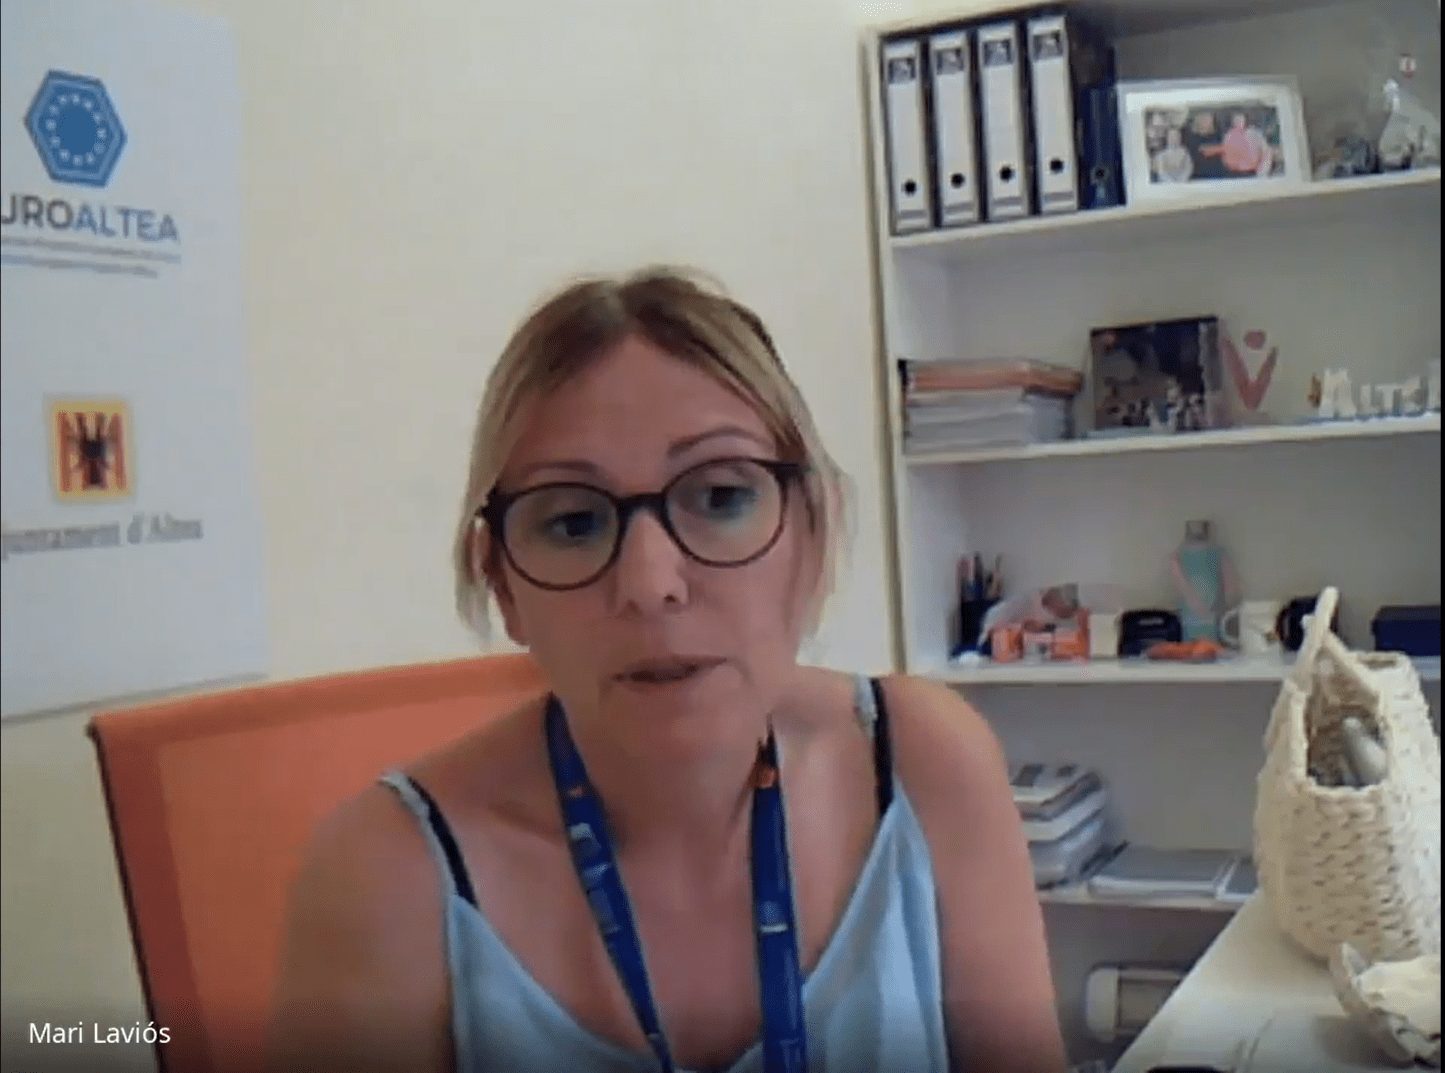 Interview with María Laviós of Altea’s City Hall about Participatory Budgeting